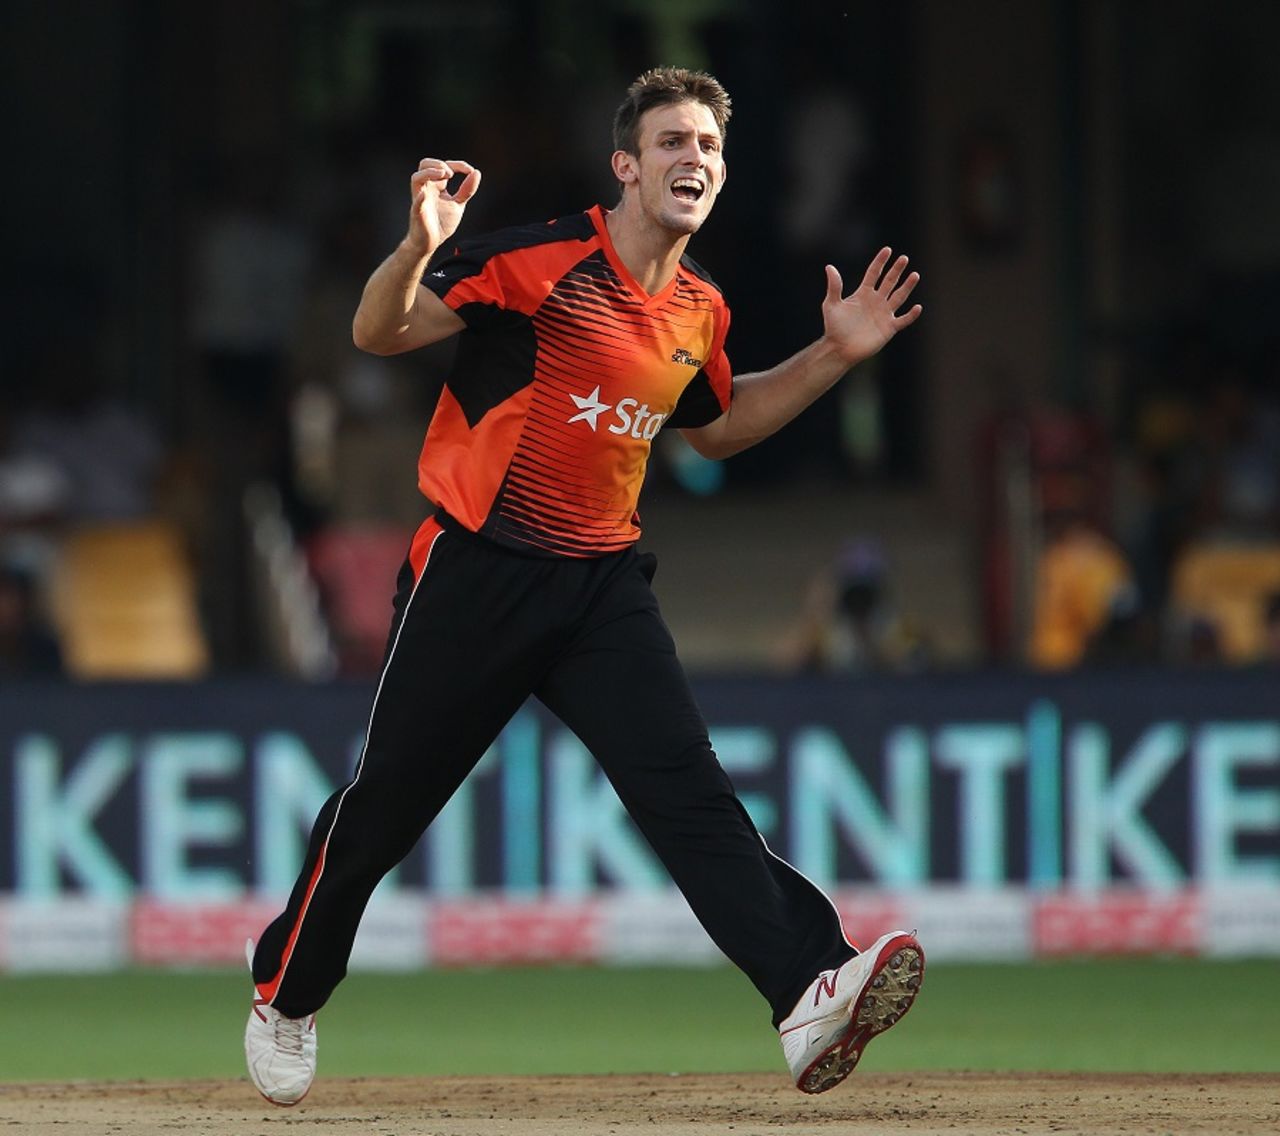 Mitchell Marsh, the stand-in captain, picked up a couple of wickets, Lahore Lions v Perth Scorchers, Champions League T20, Group A, Bangalore, September 30, 2014